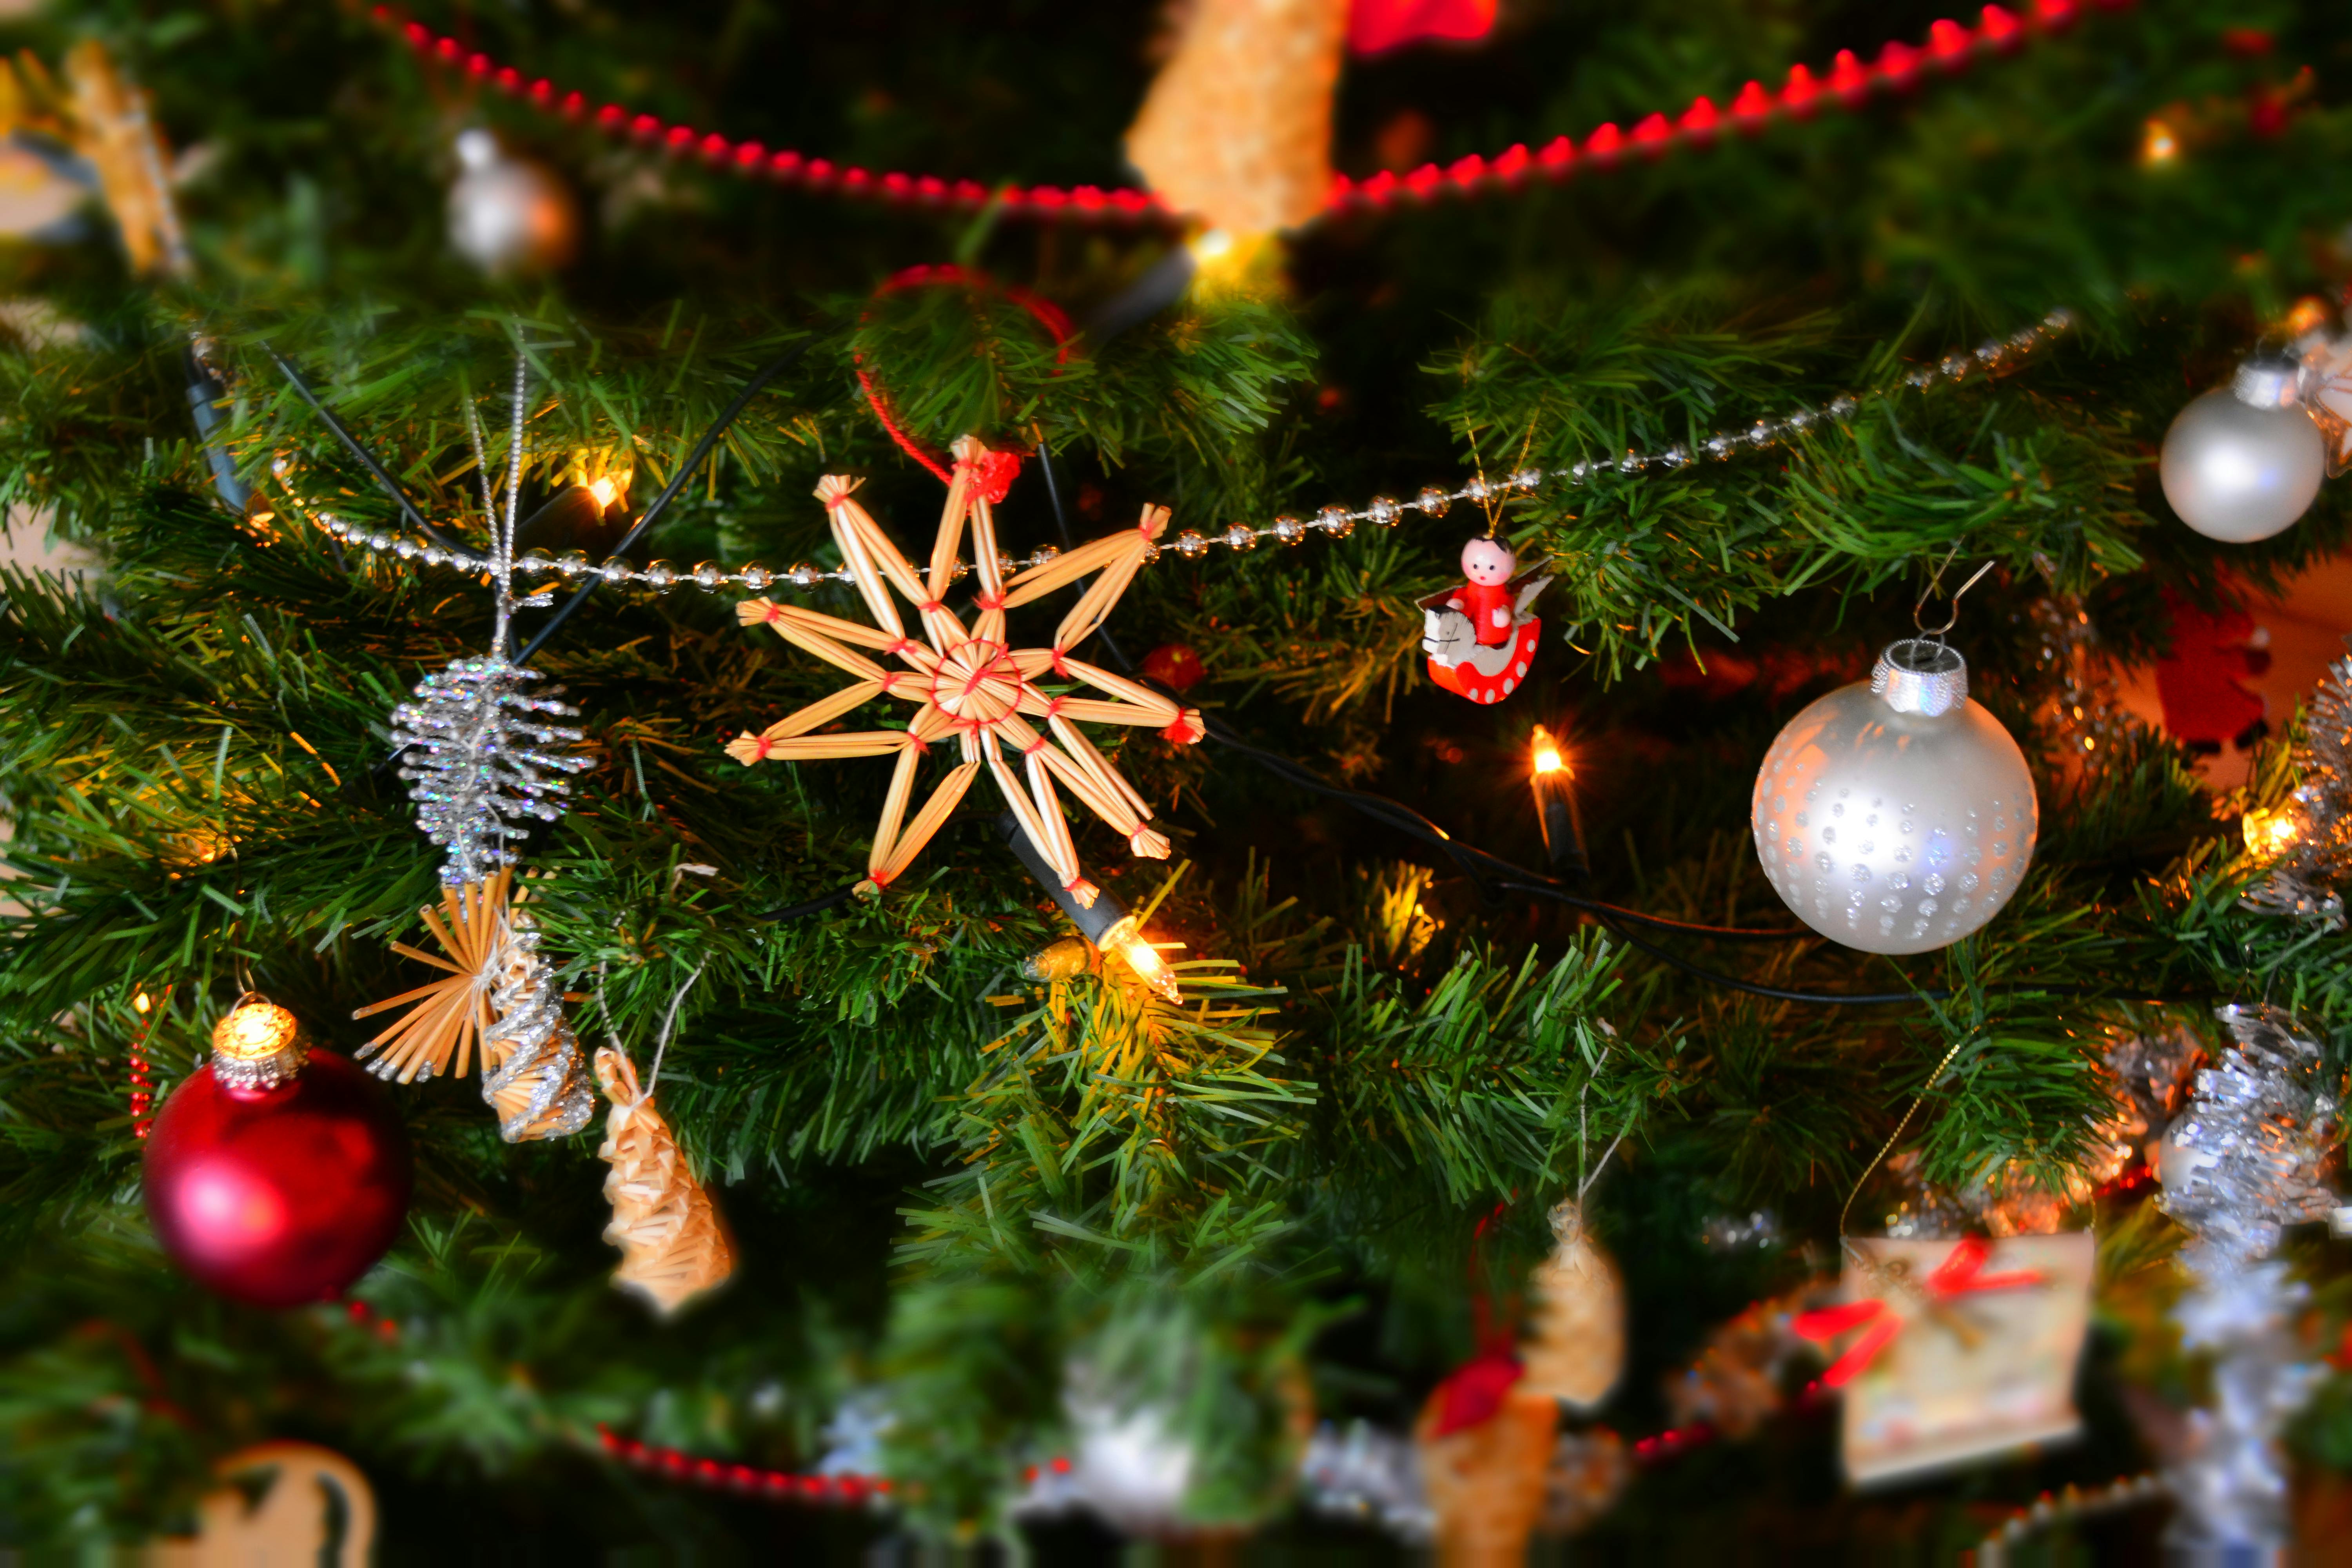 Ornaments hanging on a tree